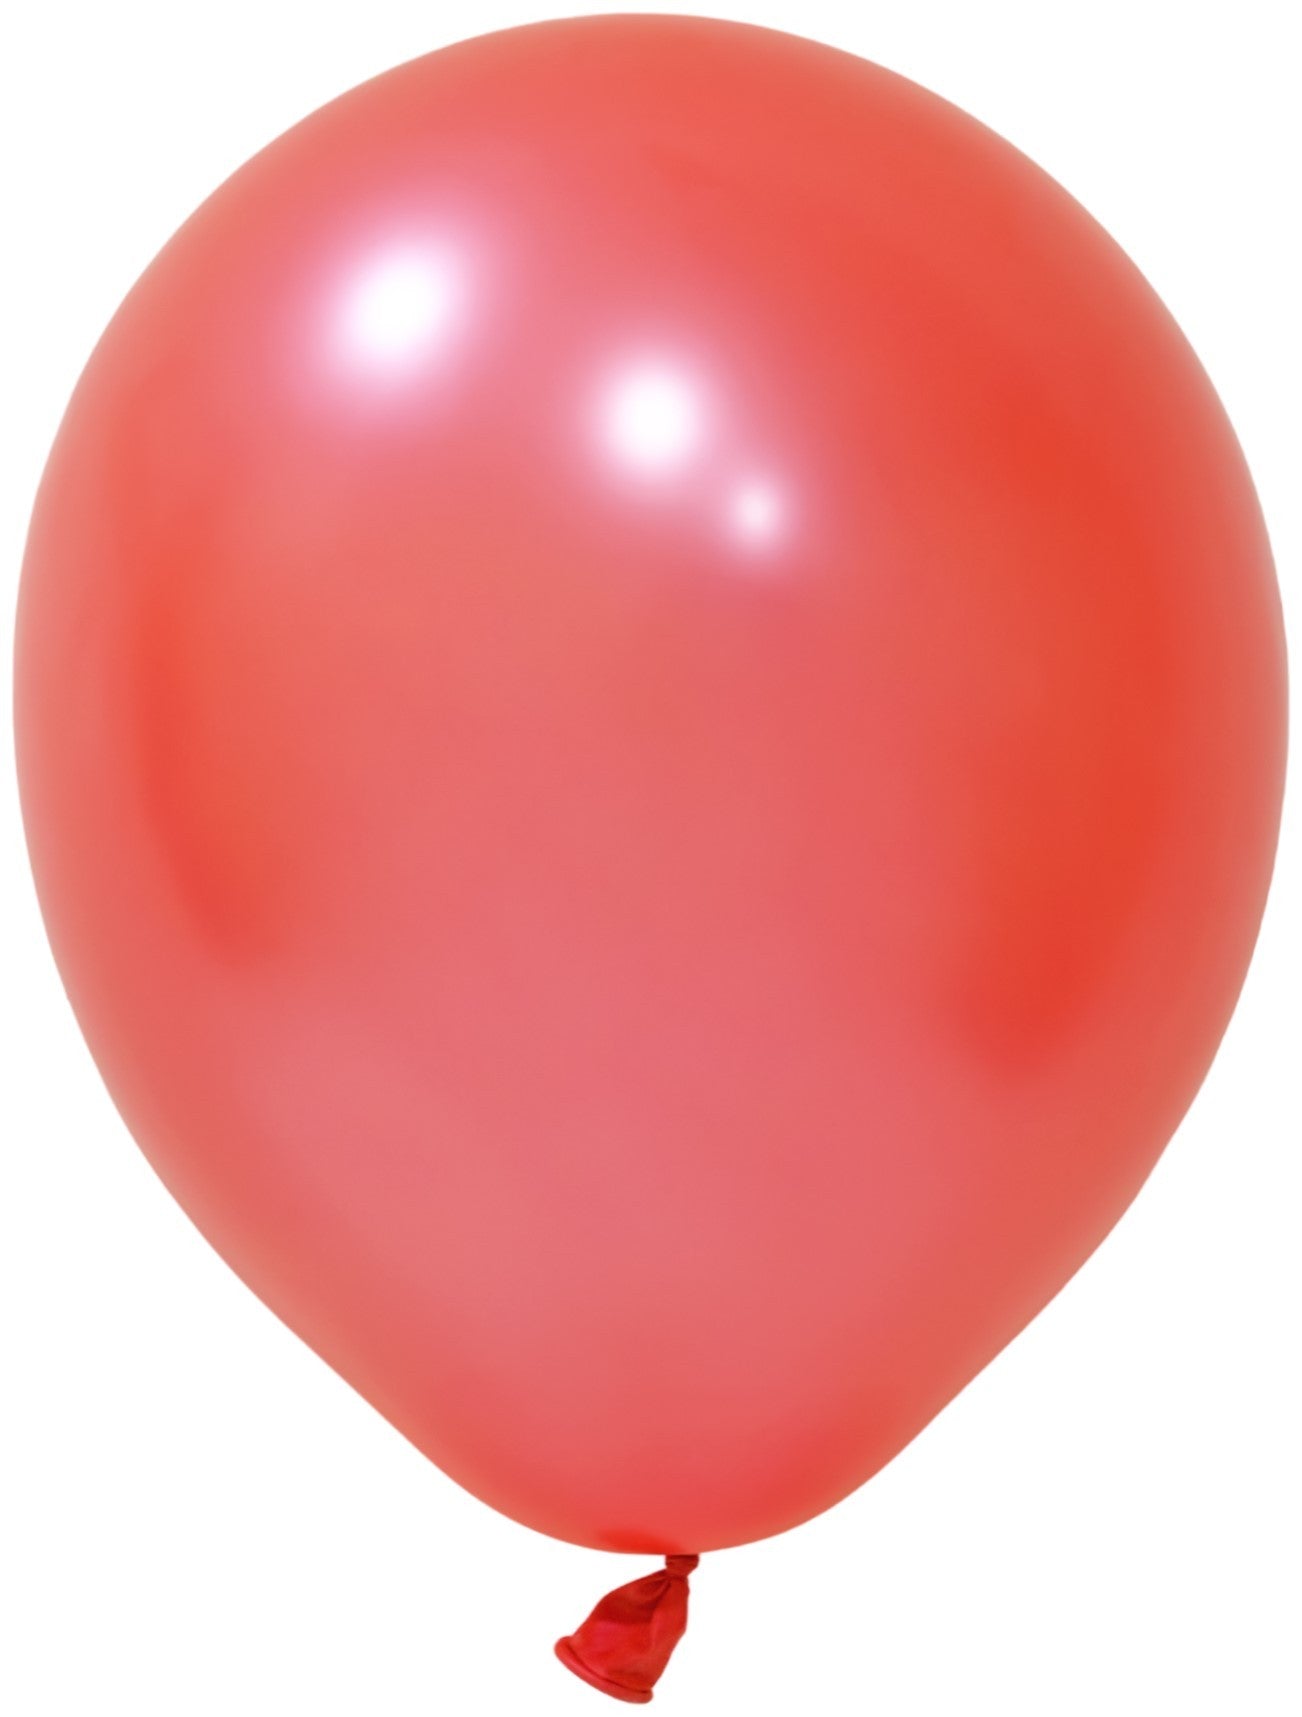 View Red Metallic Latex Balloon 10inch Pack of 100 information